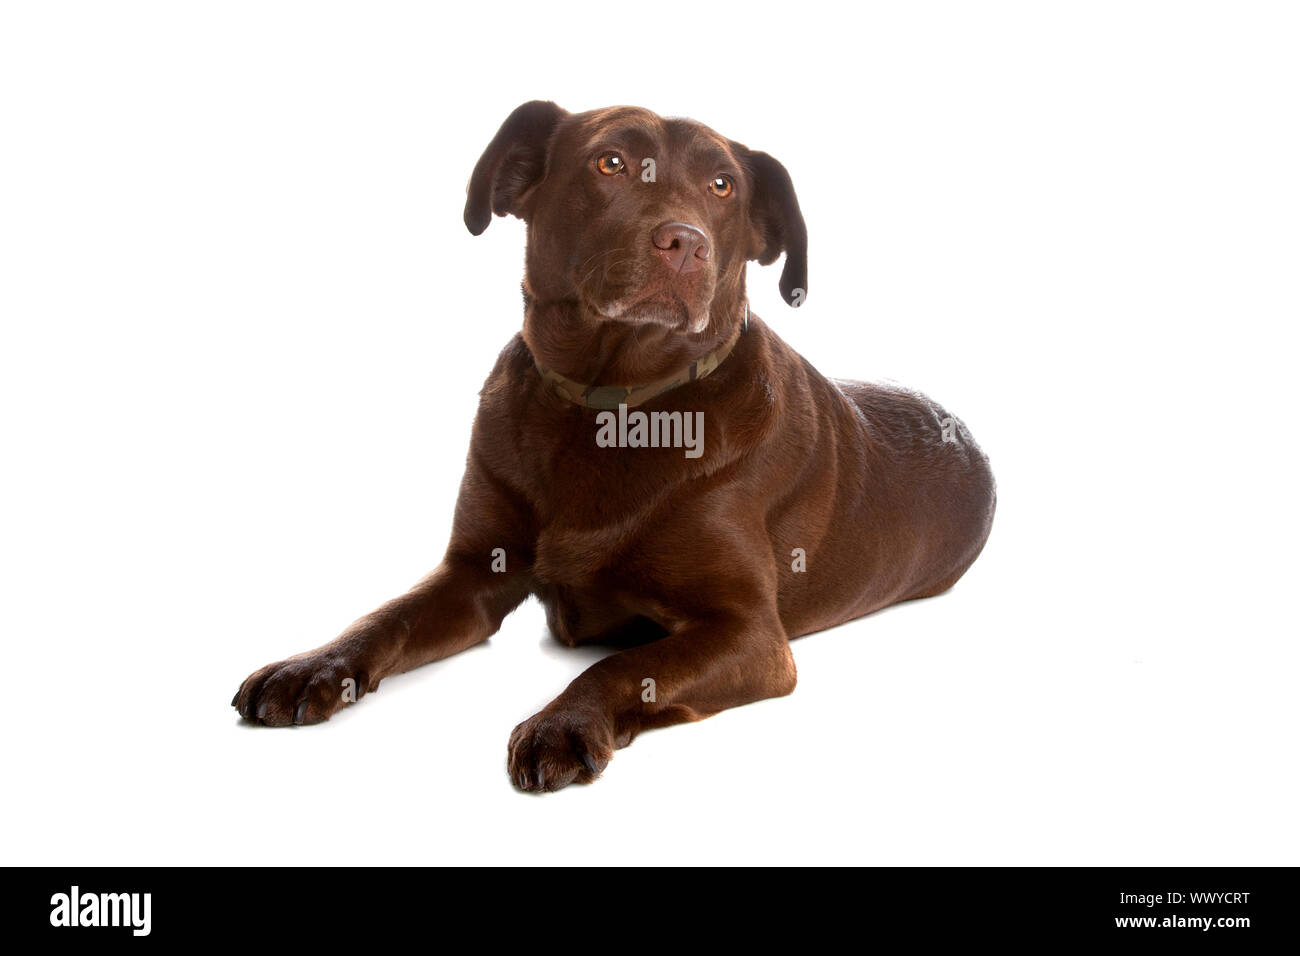 Chocolate labrador retriever dog lying and looking away, isolated on a white background. Stock Photo